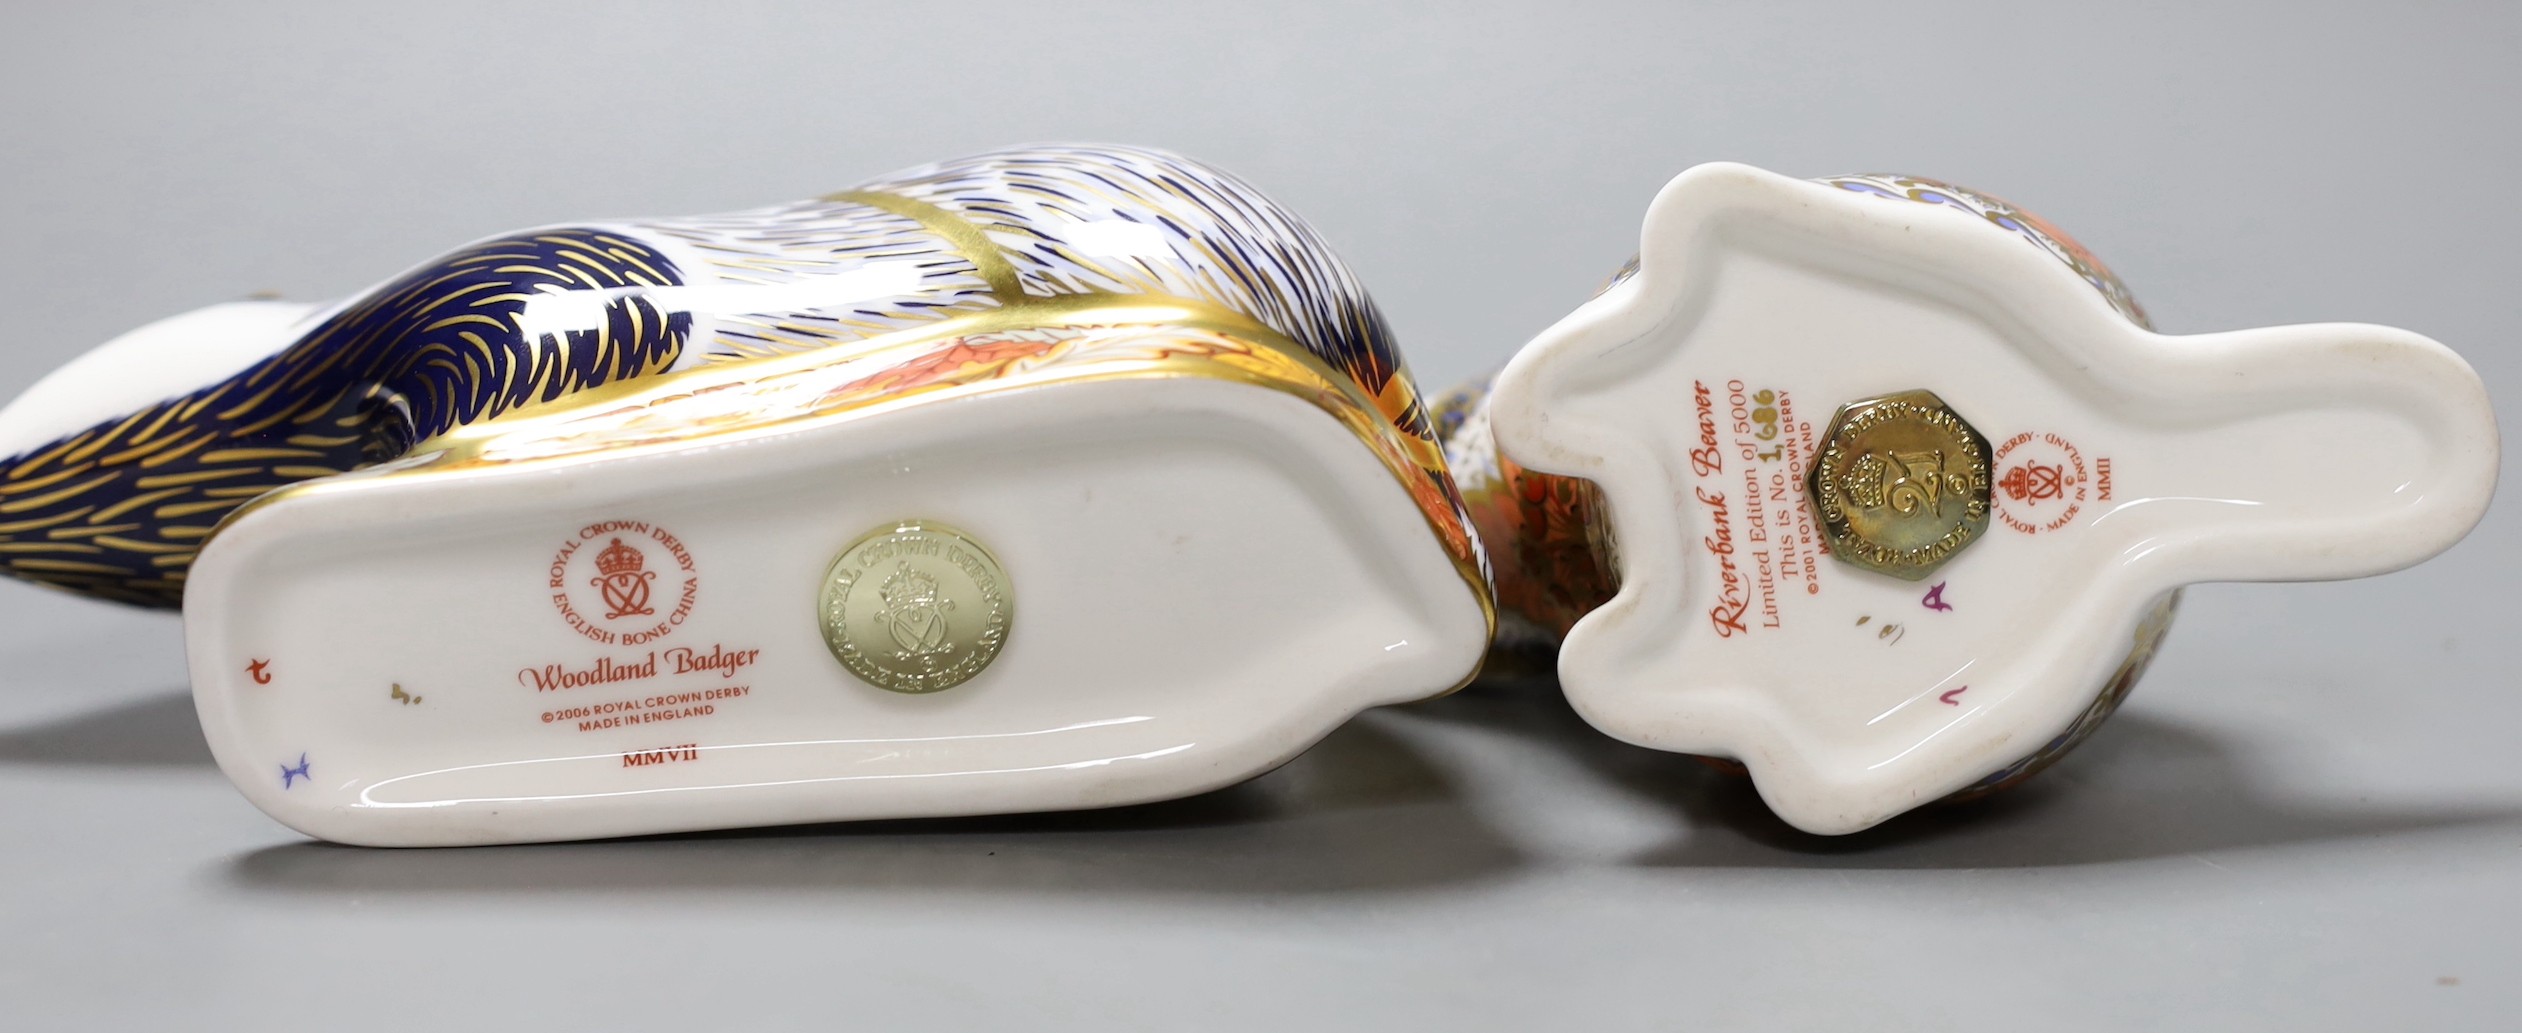 Two Royal Crown Derby paperweights - Riverbank Beaver, limited edition, 1686/5000, gold stopper, boxed with certificate and Woodland Badger, gold stopper, boxed, no certificate.